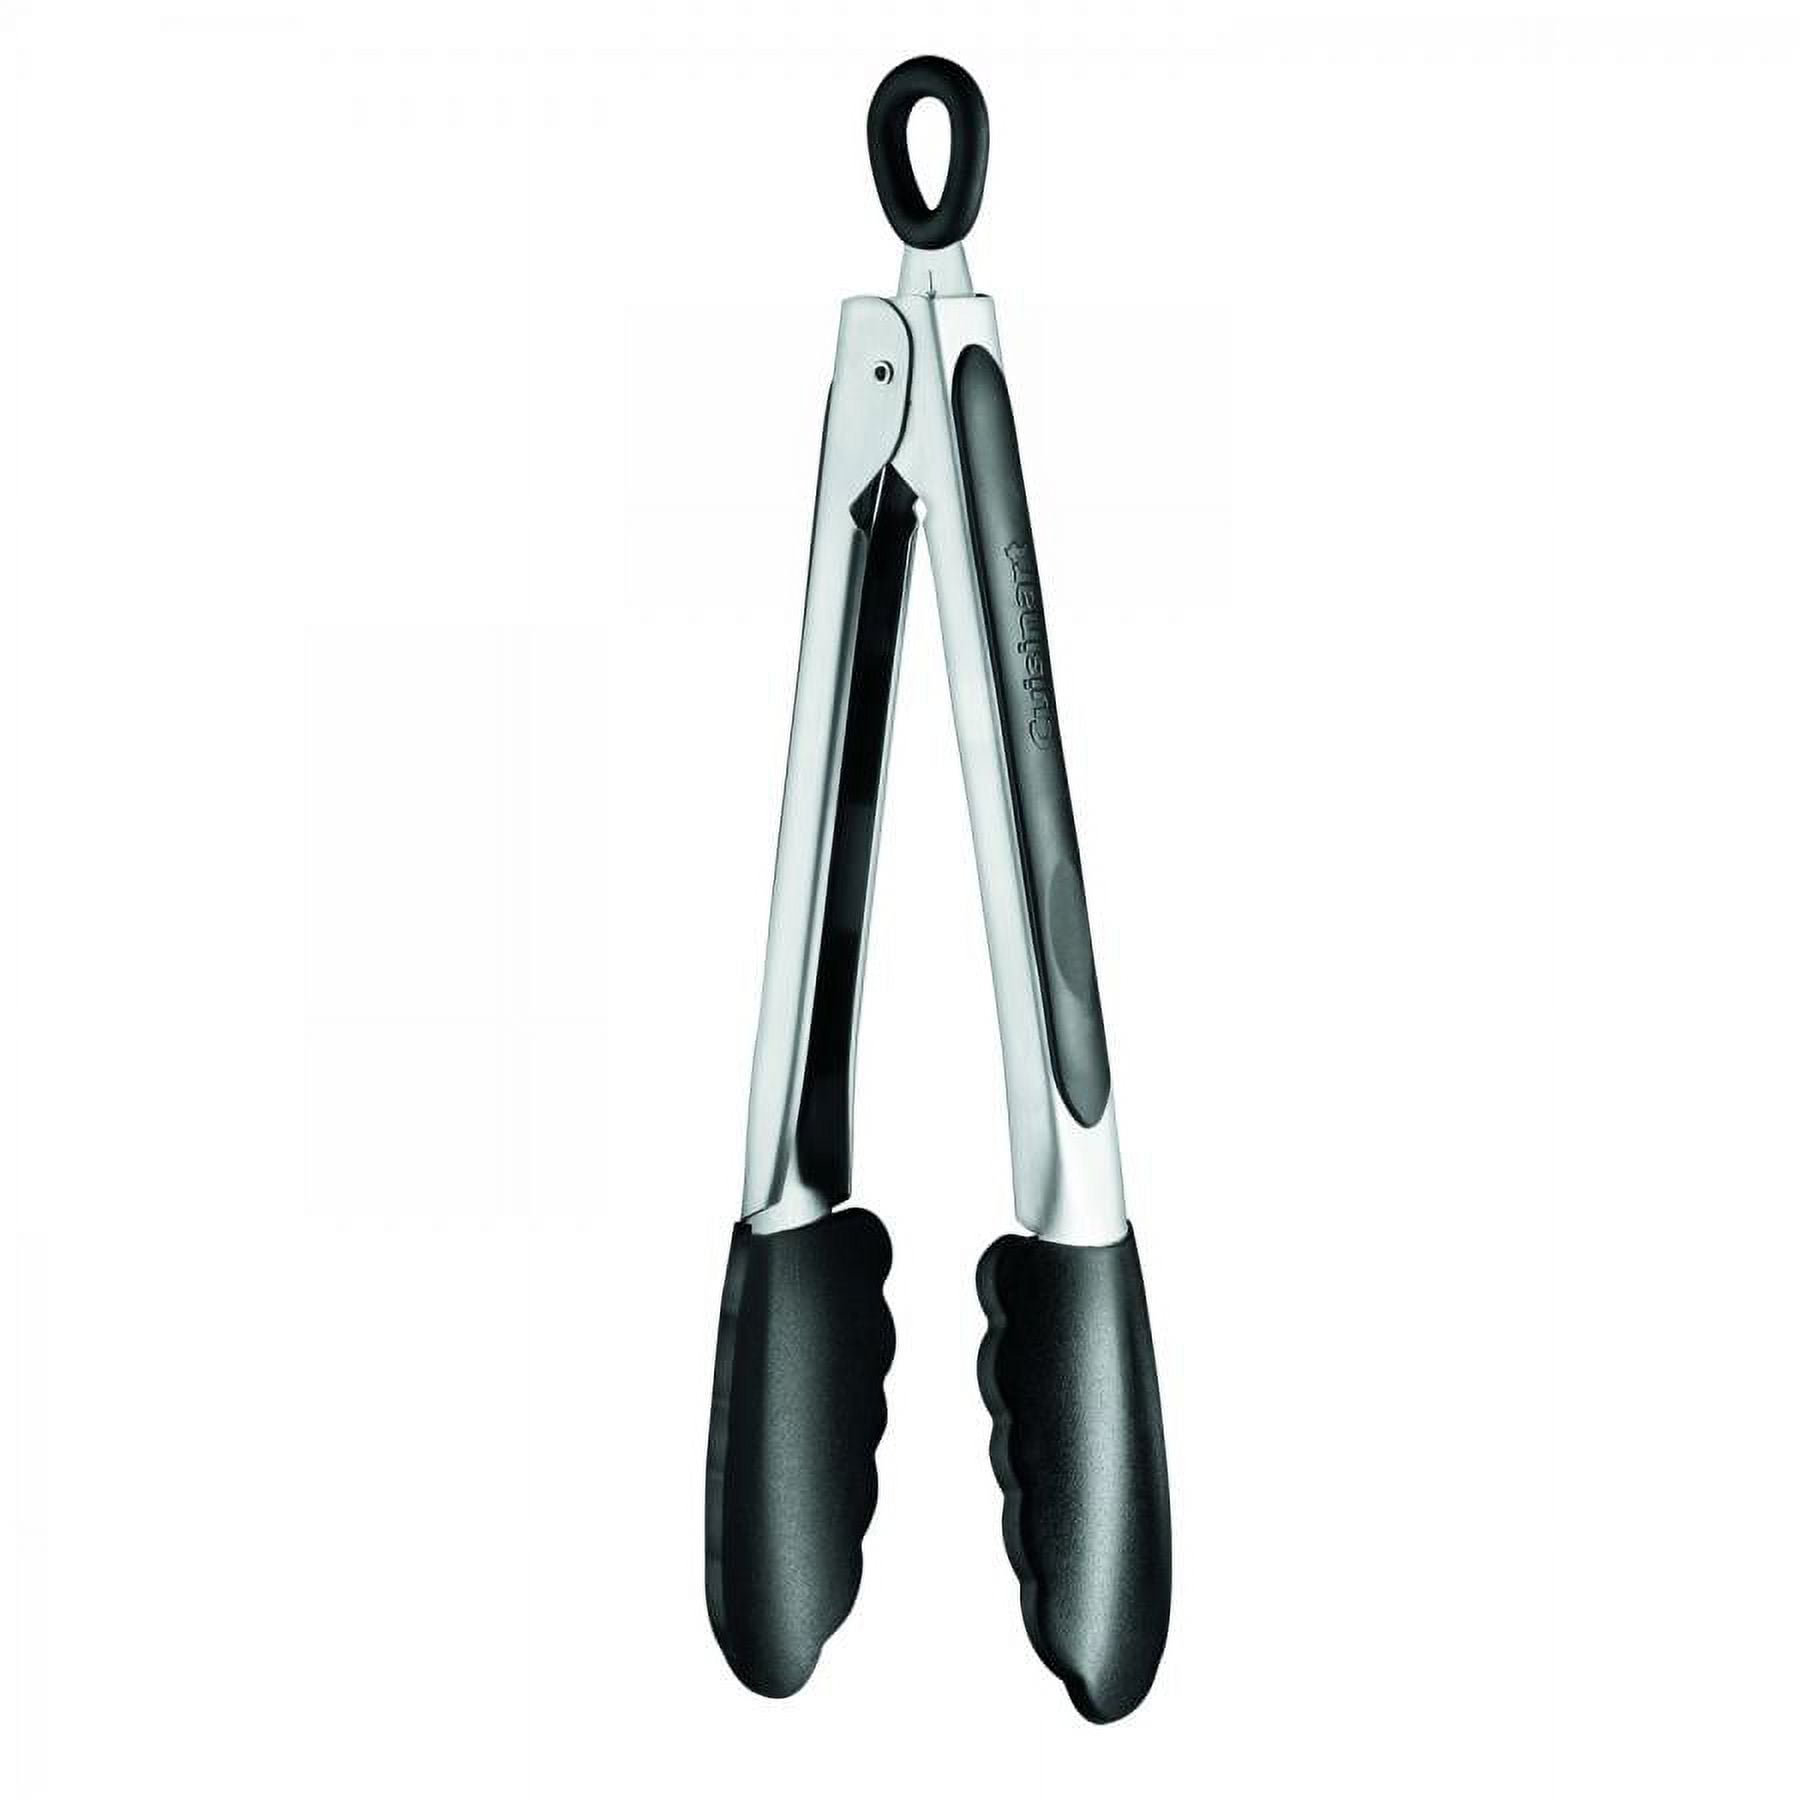 9" Cuisinart Stainless Steel Silicone-Tipped Kitchen Tongs (Black) $5.09 + Free Shipping w/ Prime or on orders $35+